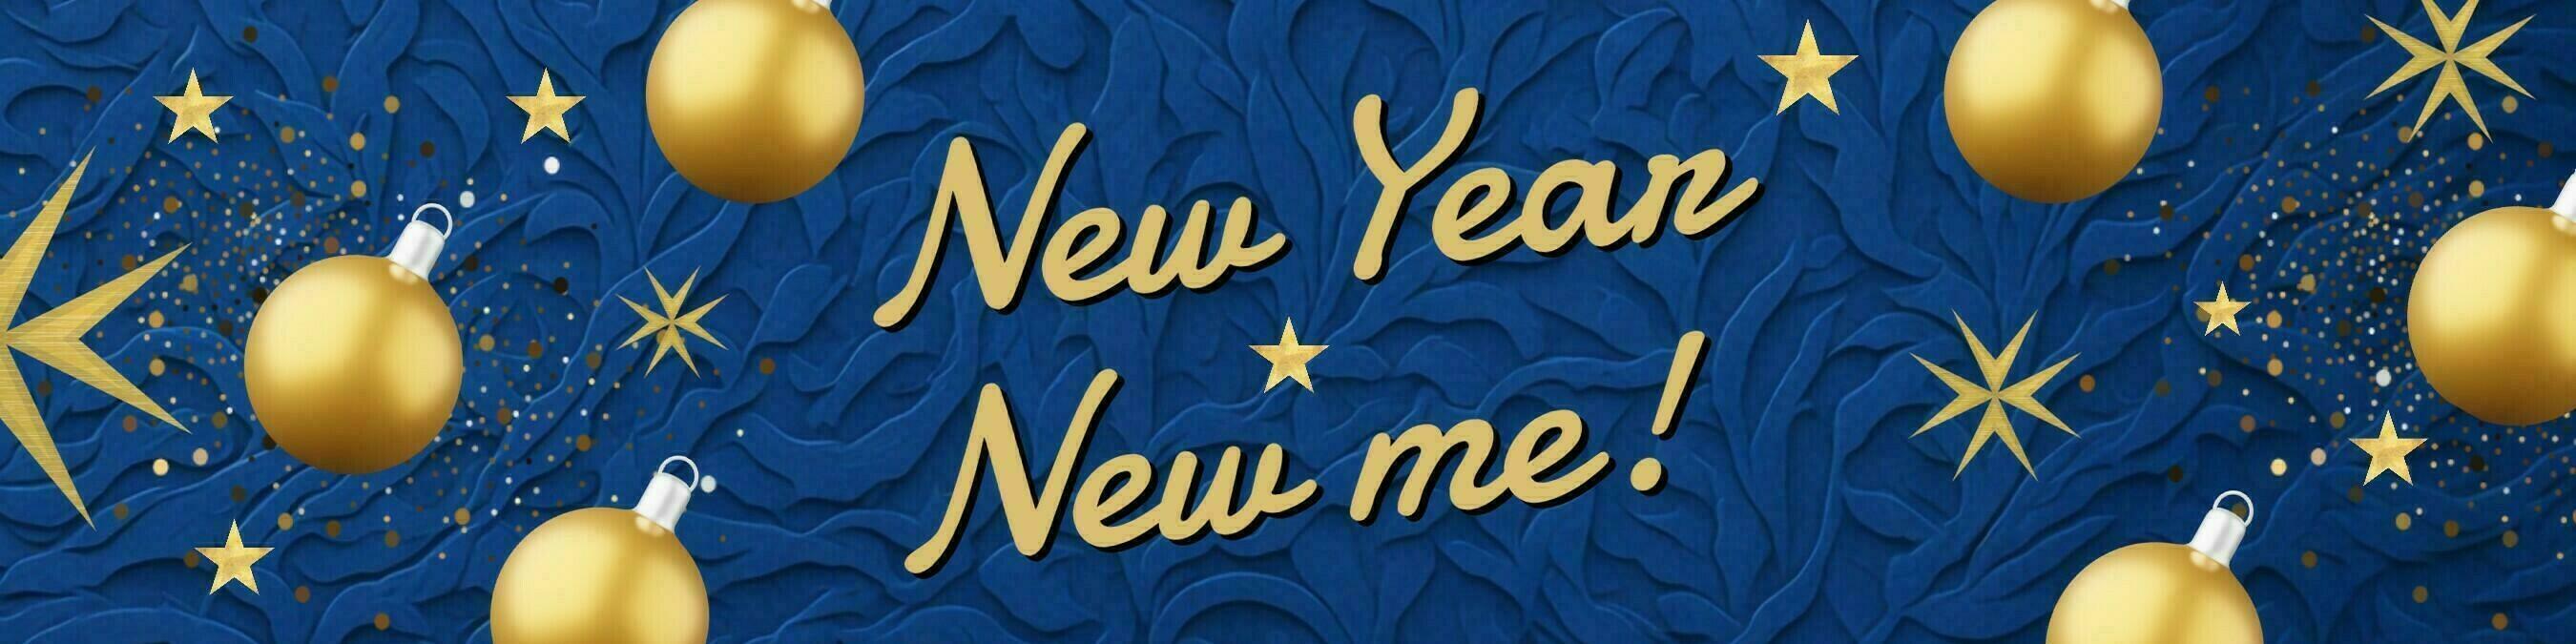 personal new year banner greeting  with blue and gold template